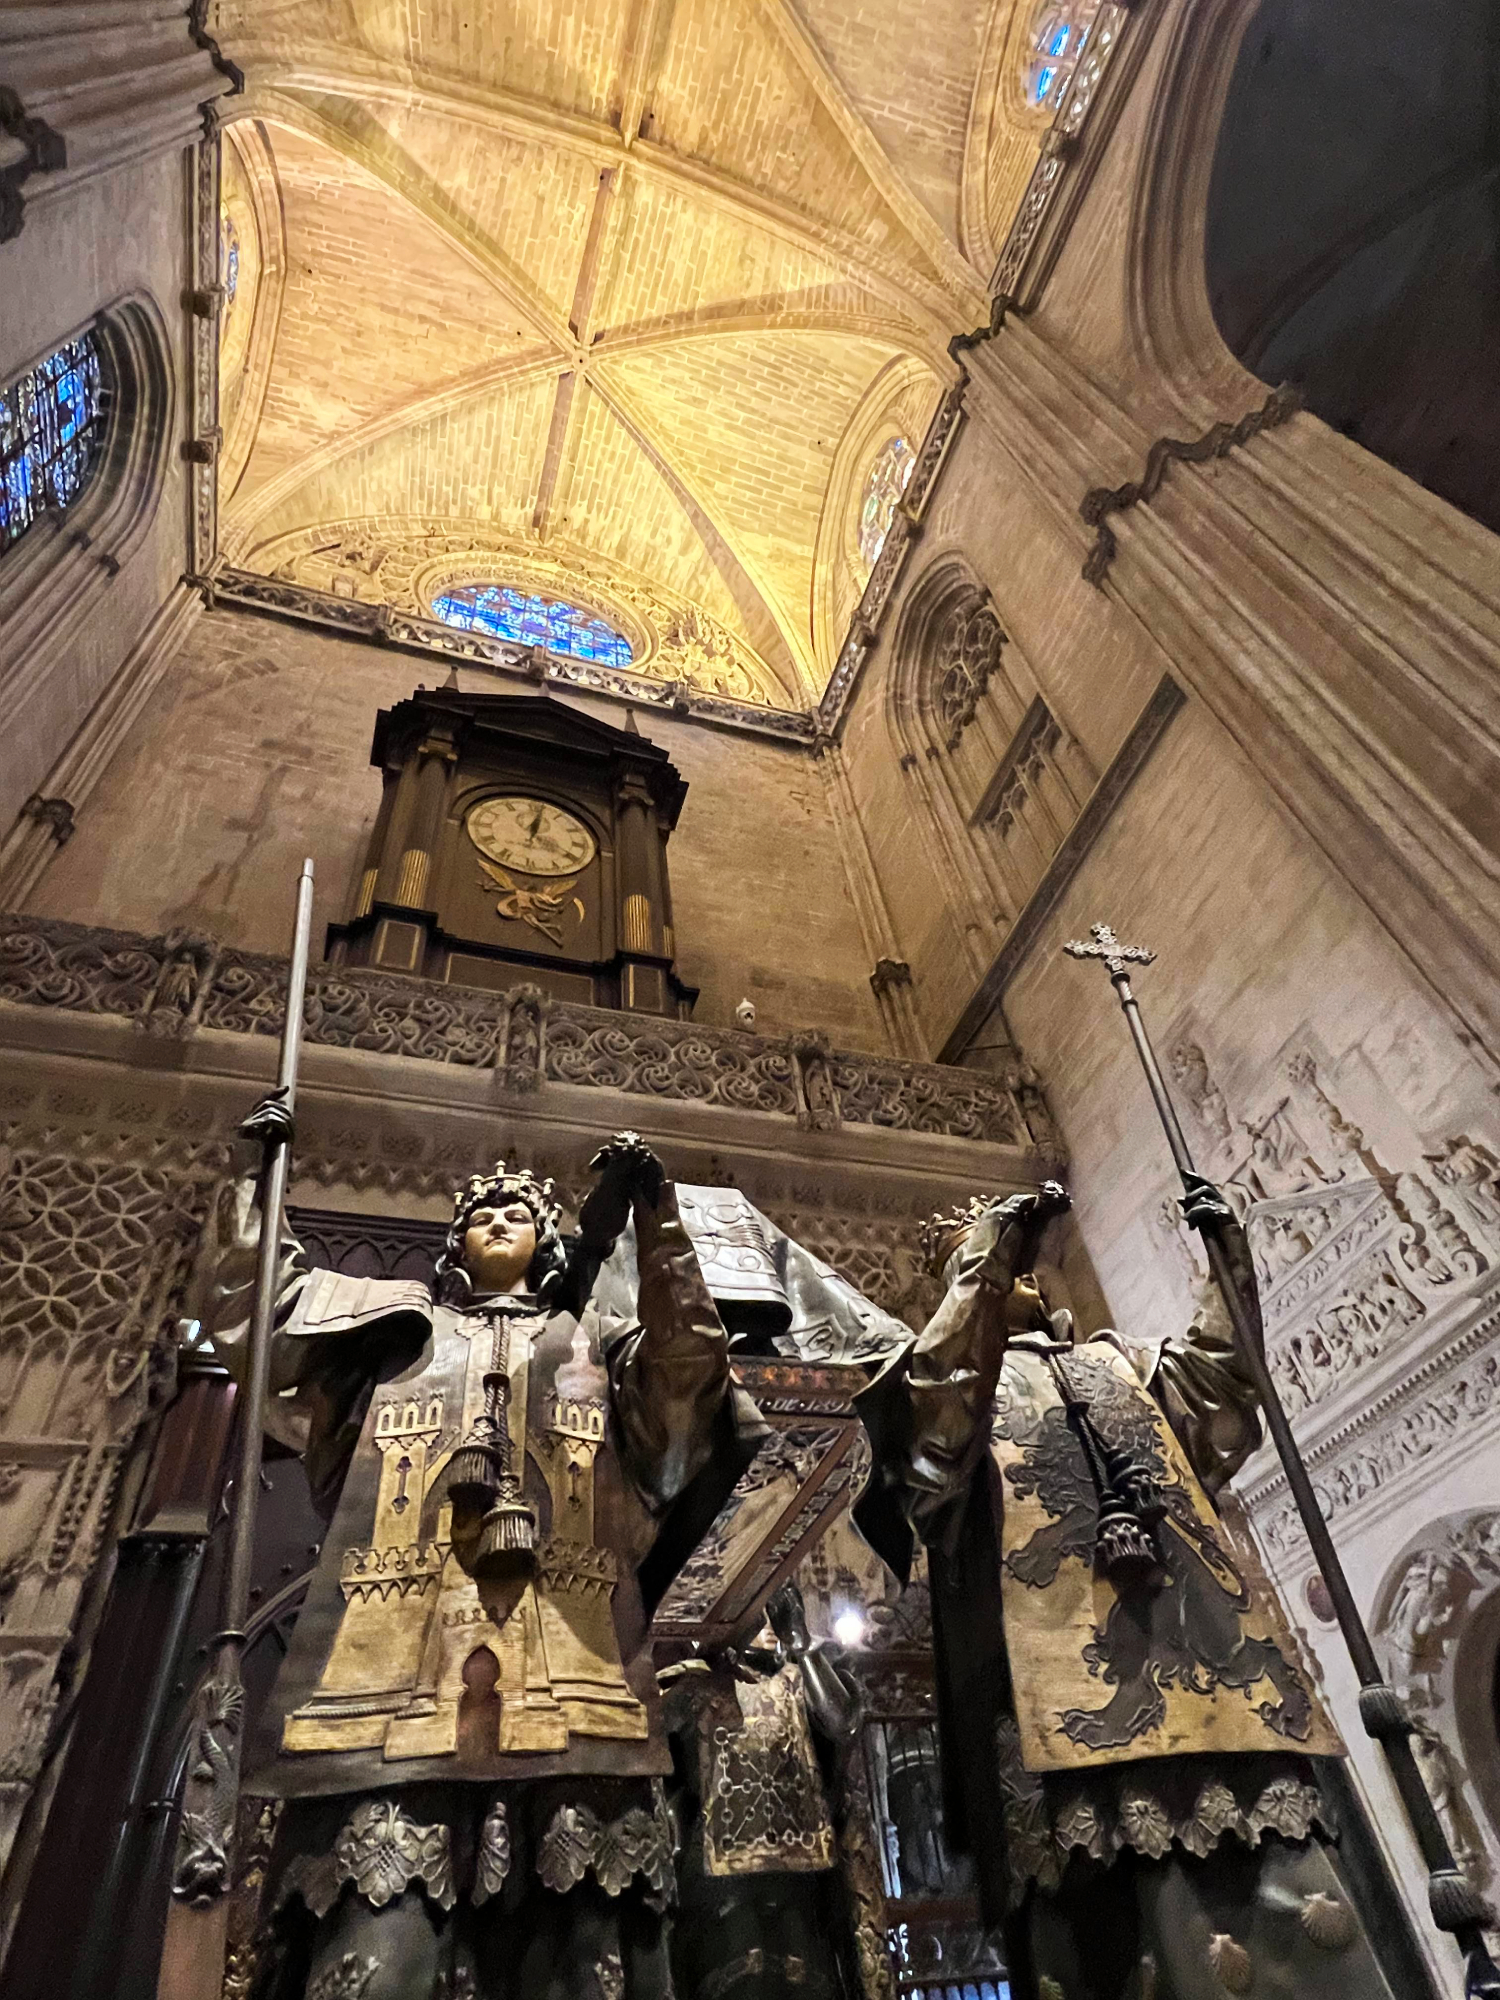 Tomb of Christopher Columbus, Seville Cathedral